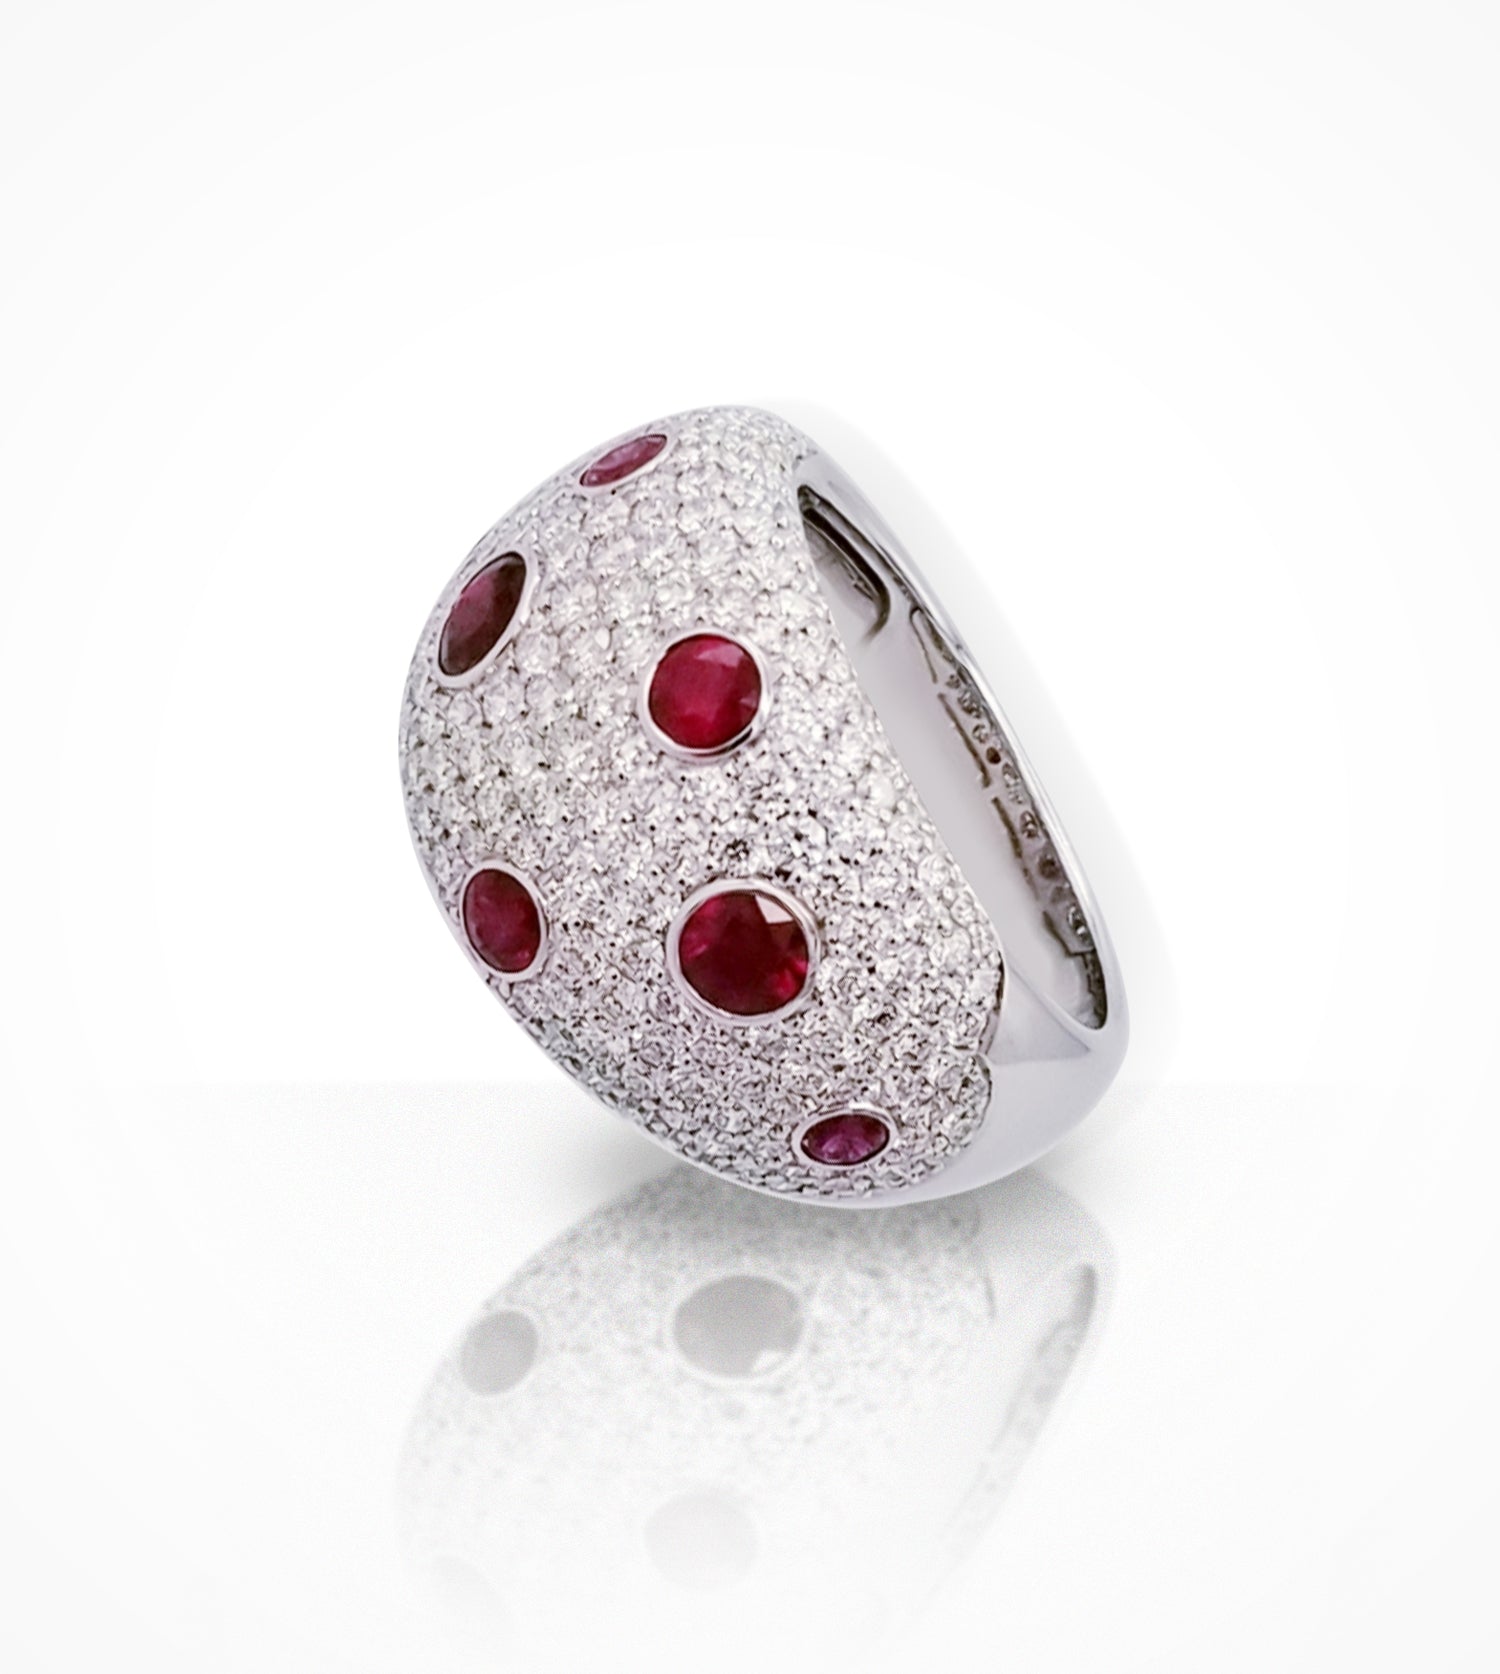 RG00255 18K White gold pave ring with 8 Rubies=1.42cts & 232 diamonds=2.32cts g,si ready-to-wear jewellery at Secrett.ca in Toronto Downtown Yorkville